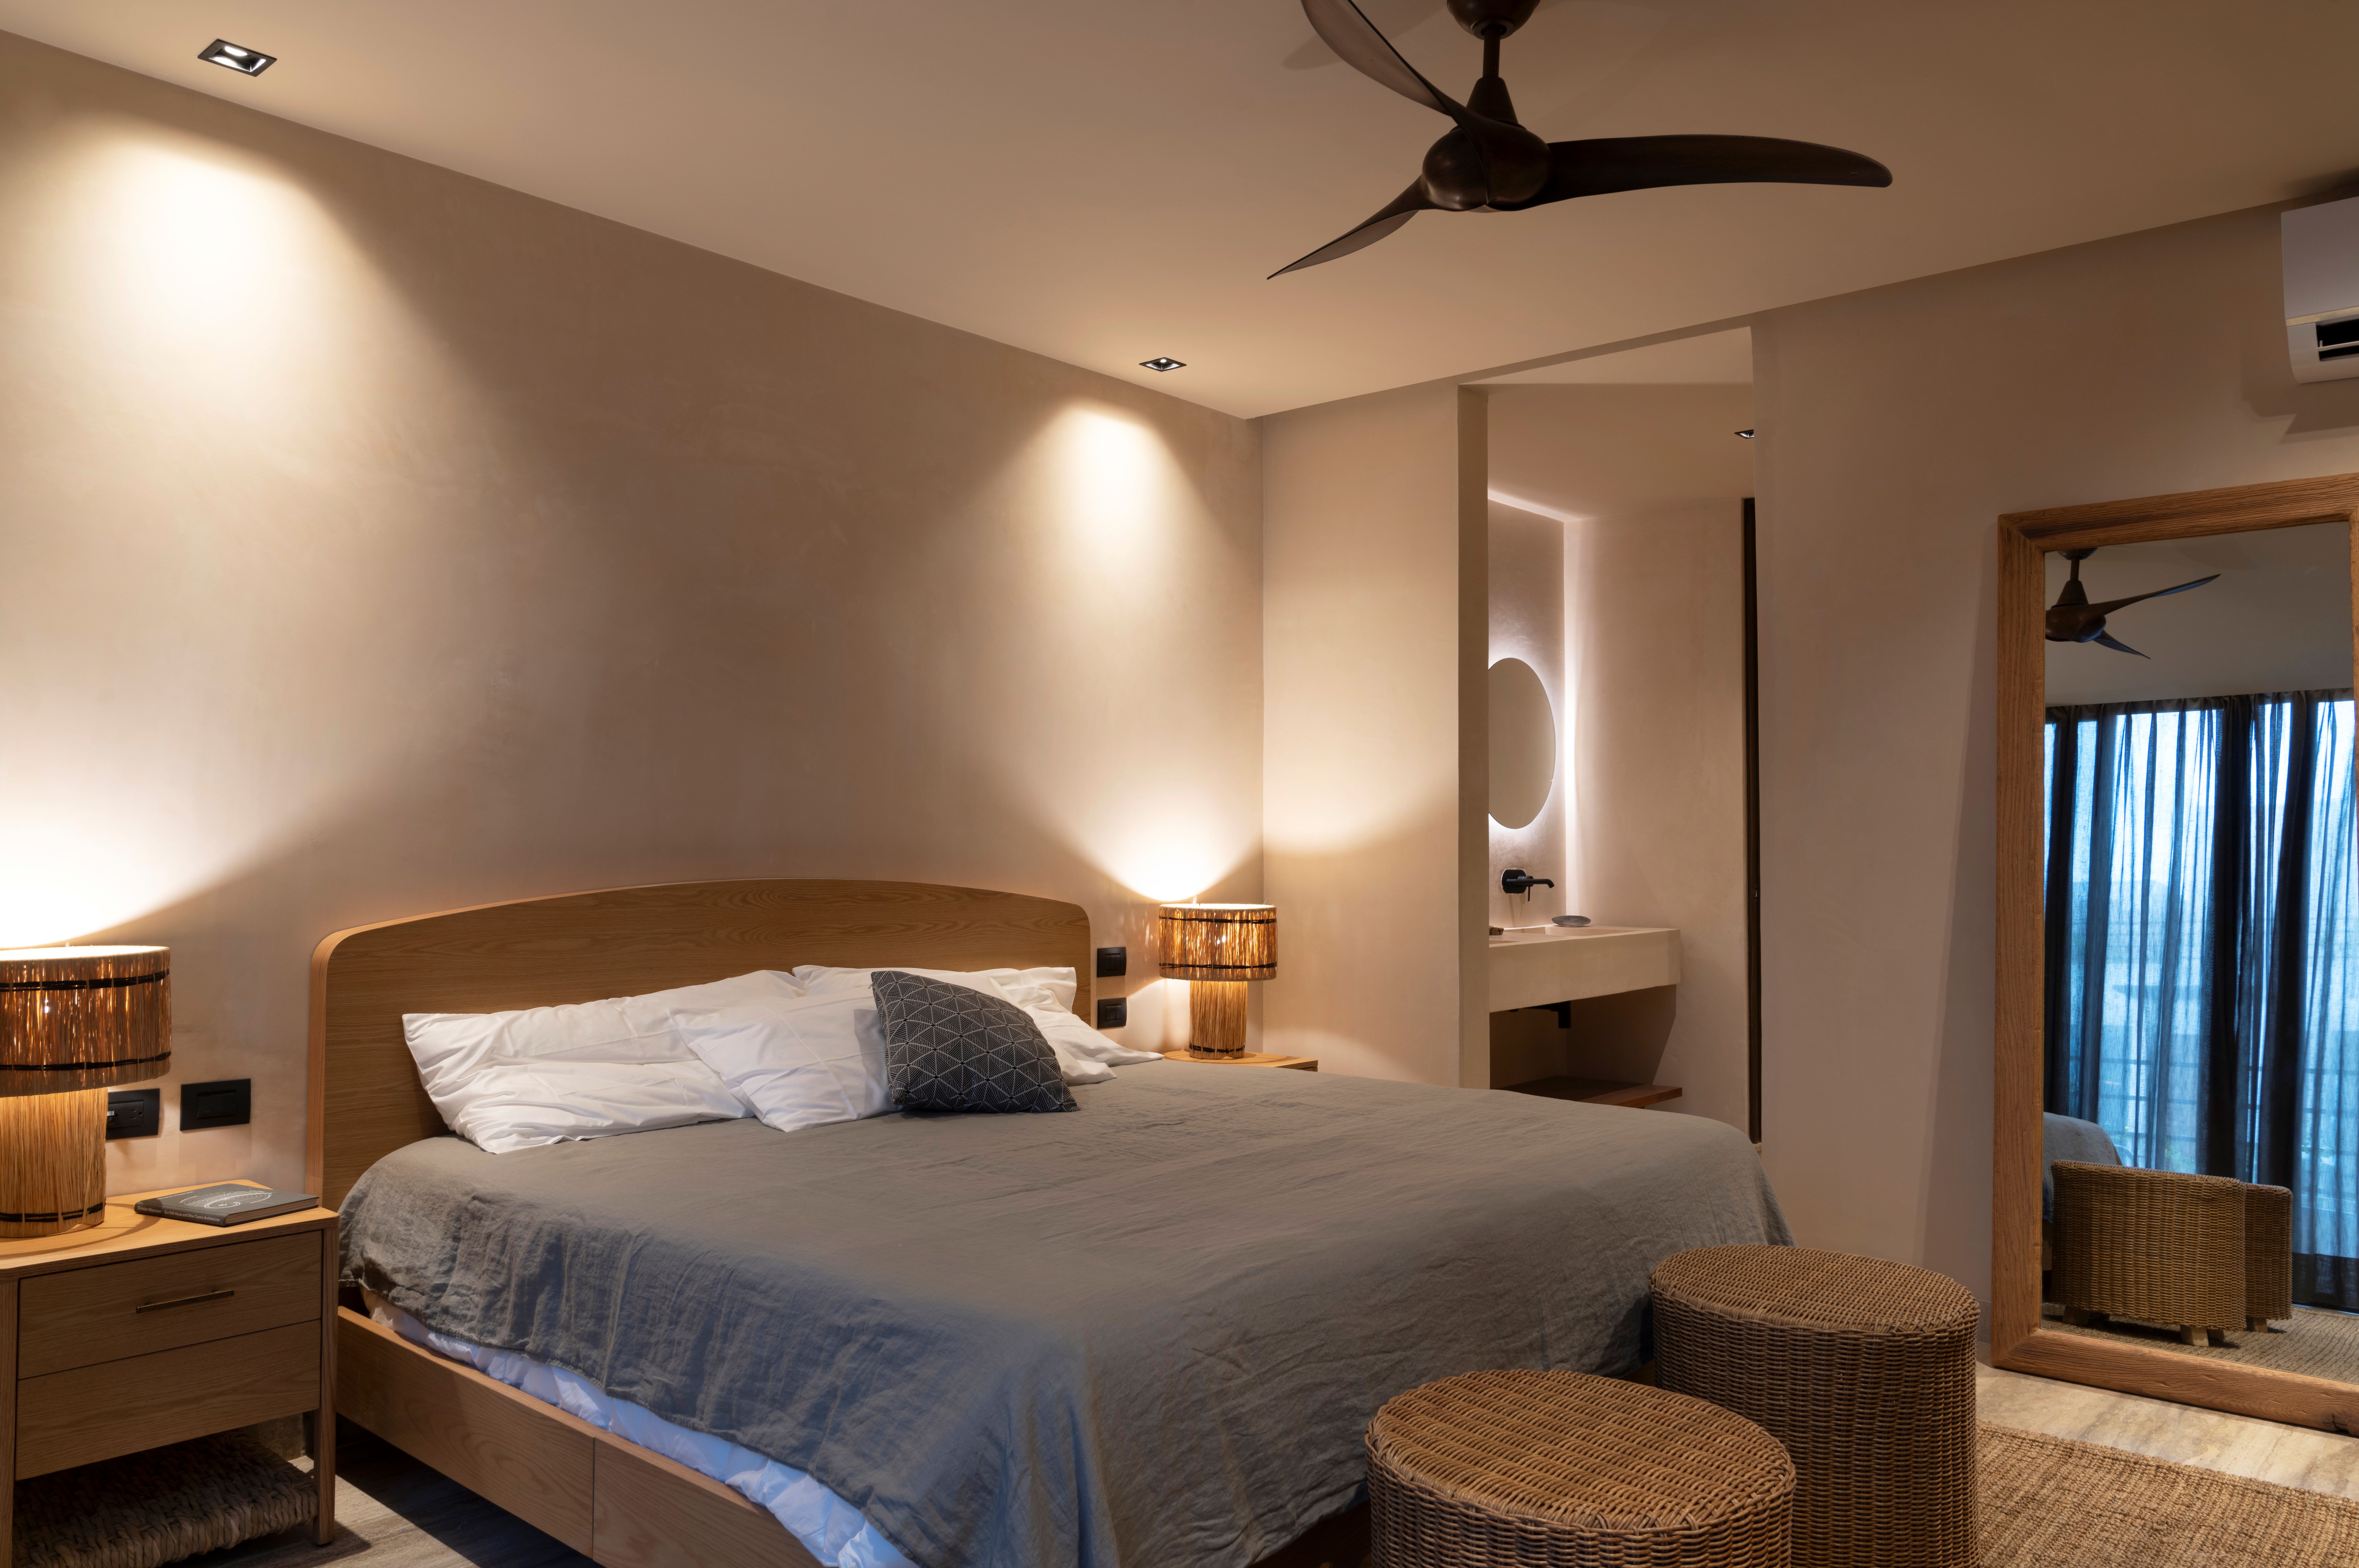 Bedroom with ceiling fan and wooden furniture